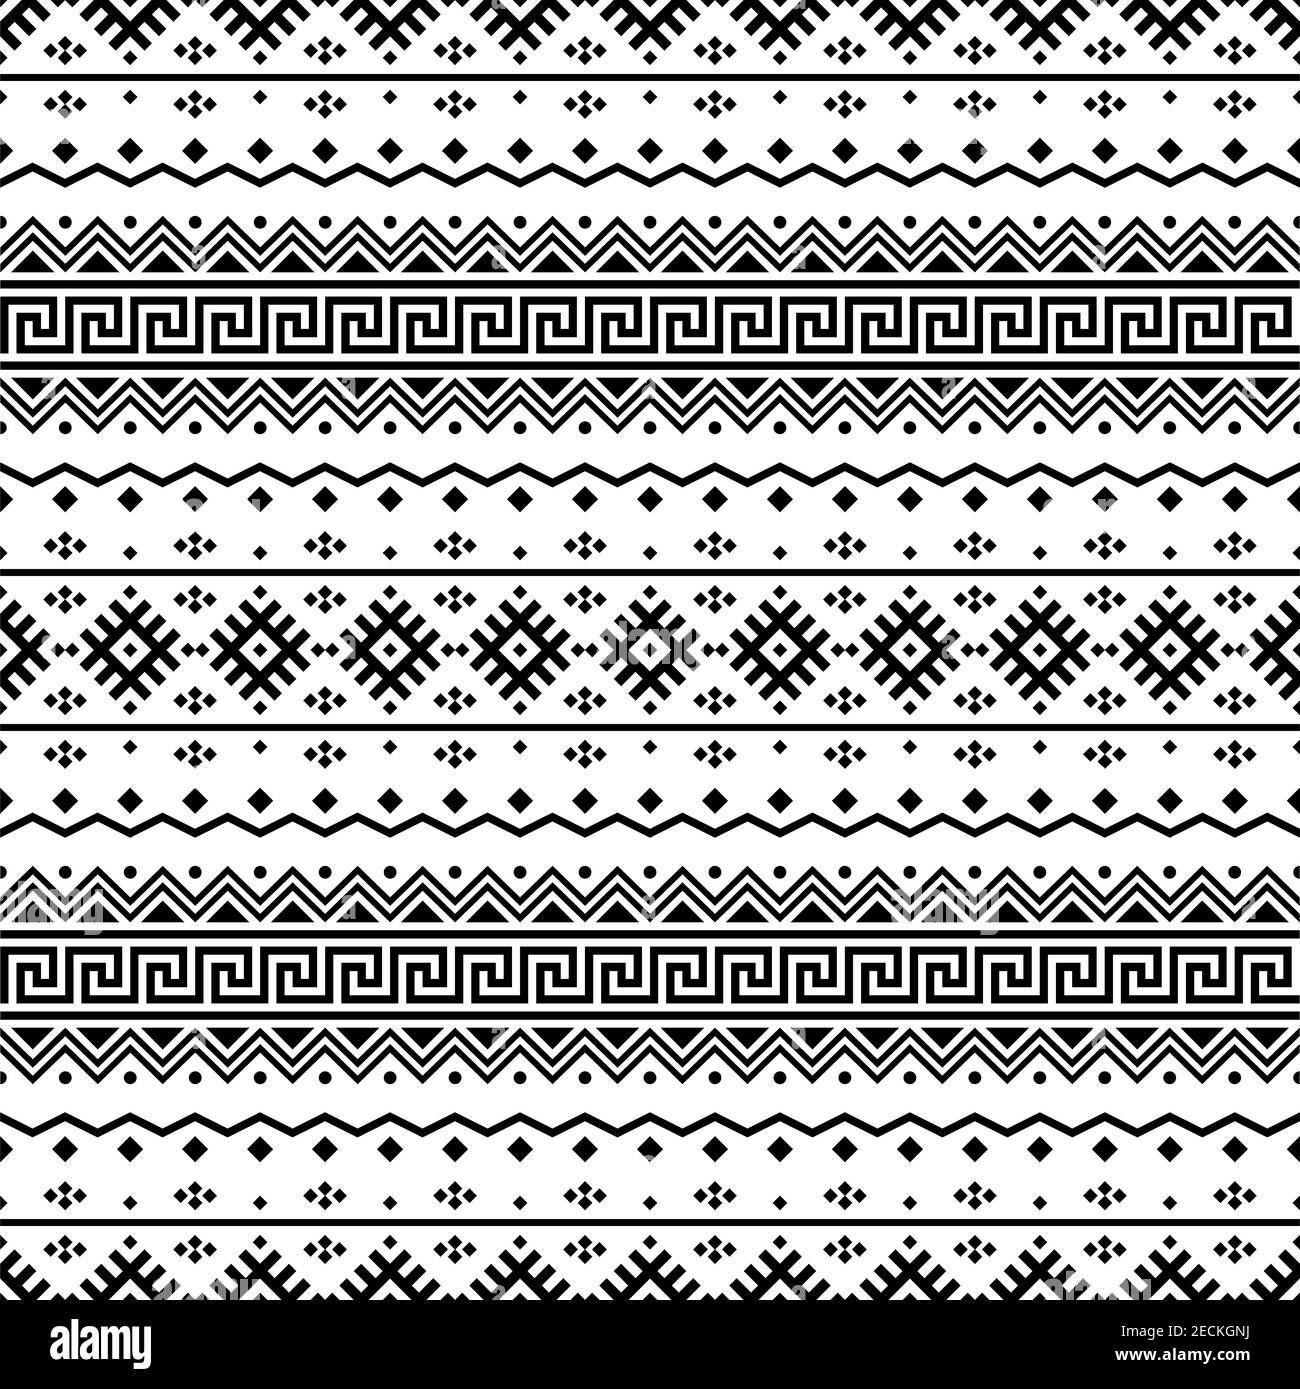 Seamless zig zag pattern in black and white Stock Vector by ©nikolae  65362803